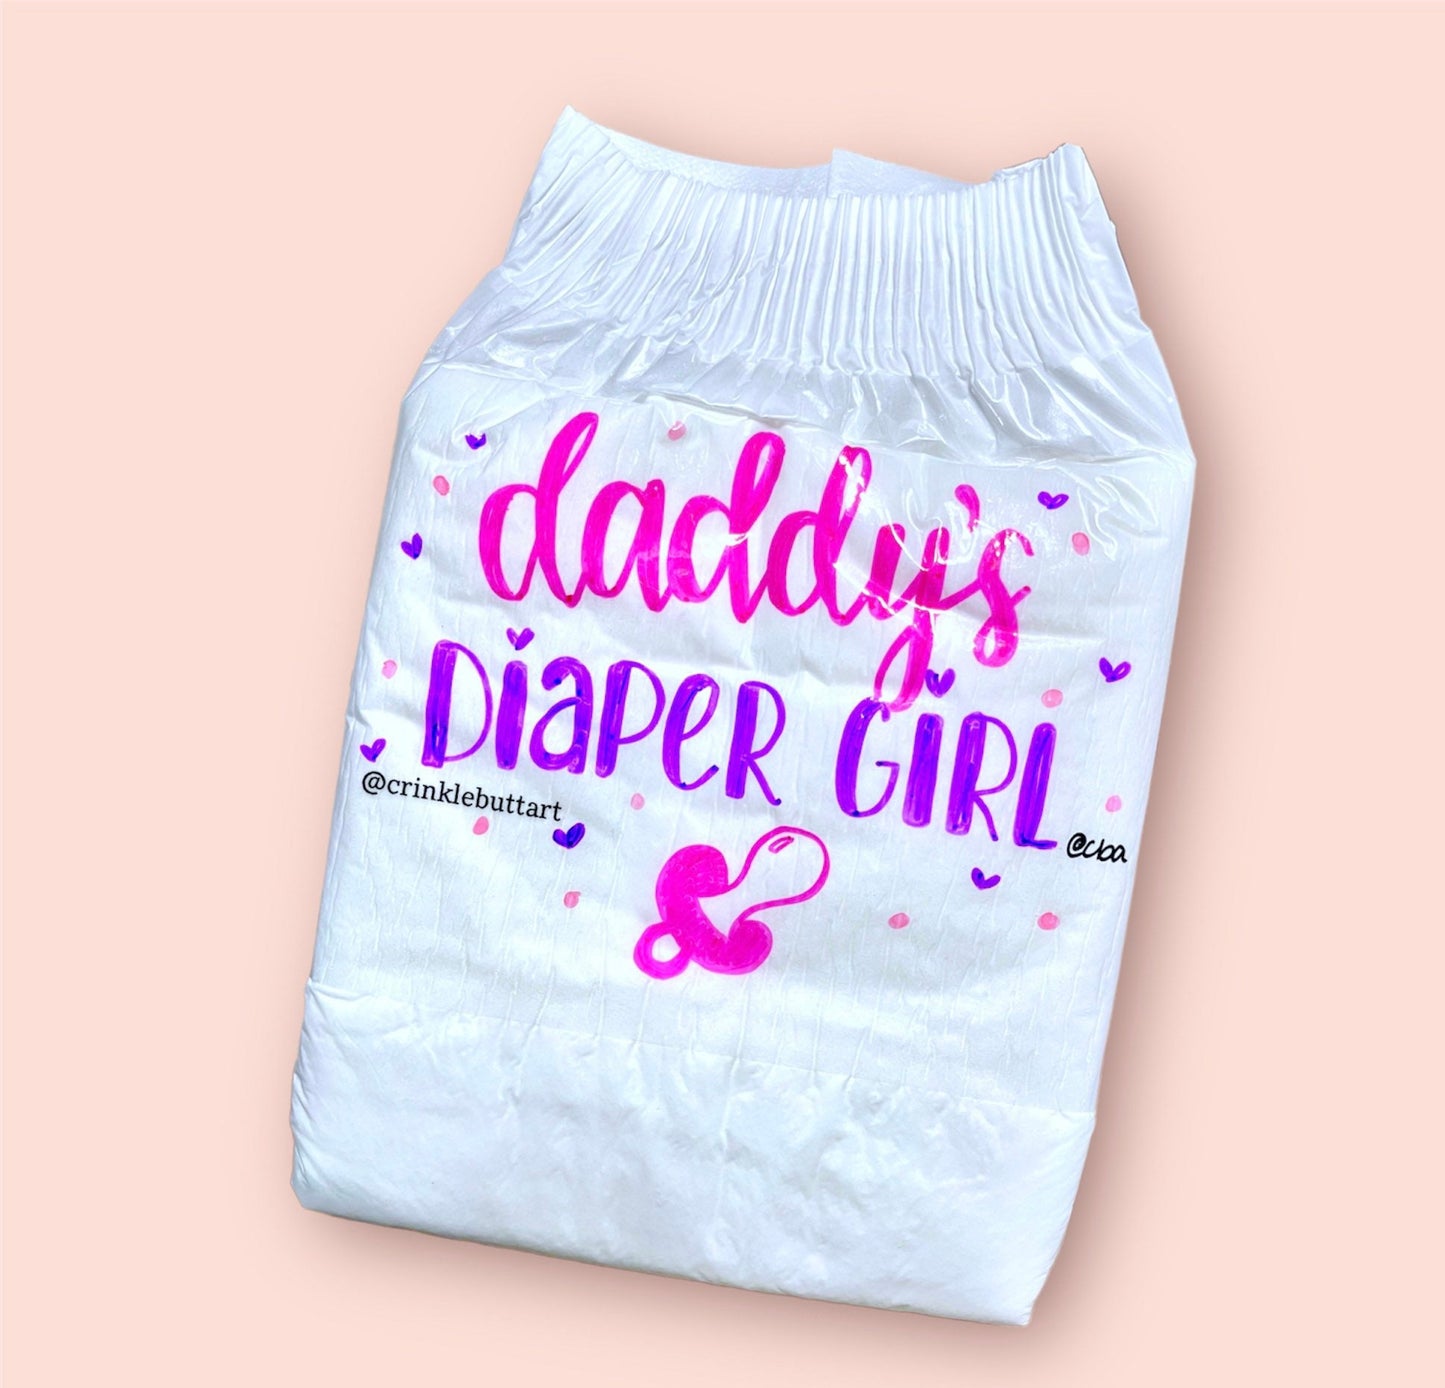 ABDL Adult Baby Diaper, "Daddy’s Diaper Girl"